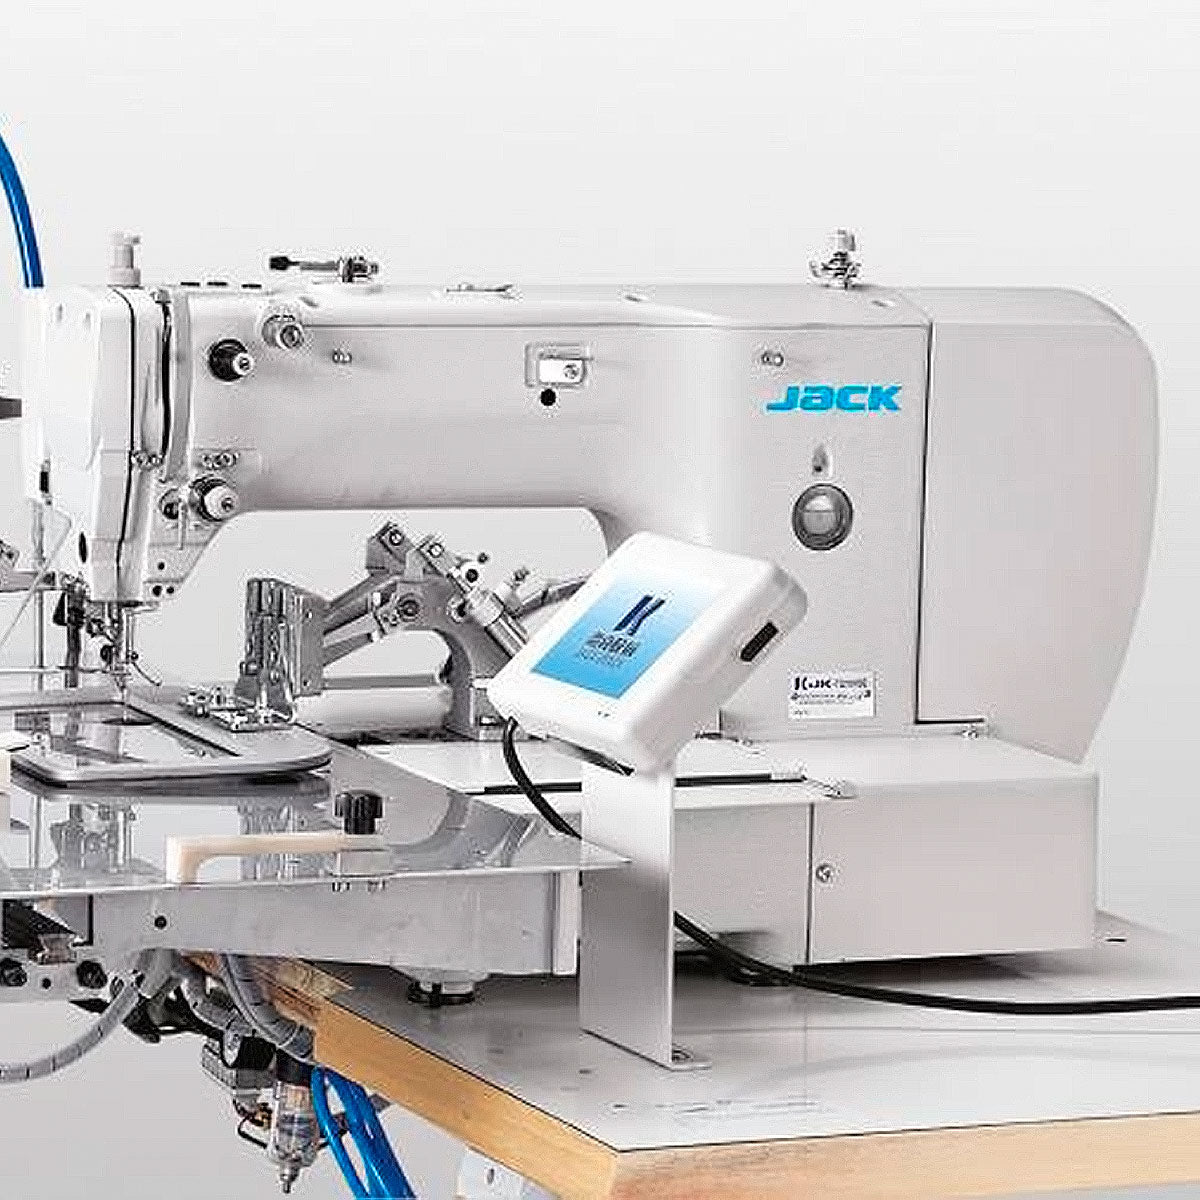 Jack T2210-DII Automatic 220mm x 100mm Programmable Pattern Tacking Machine Assembled with Table and Stand Included